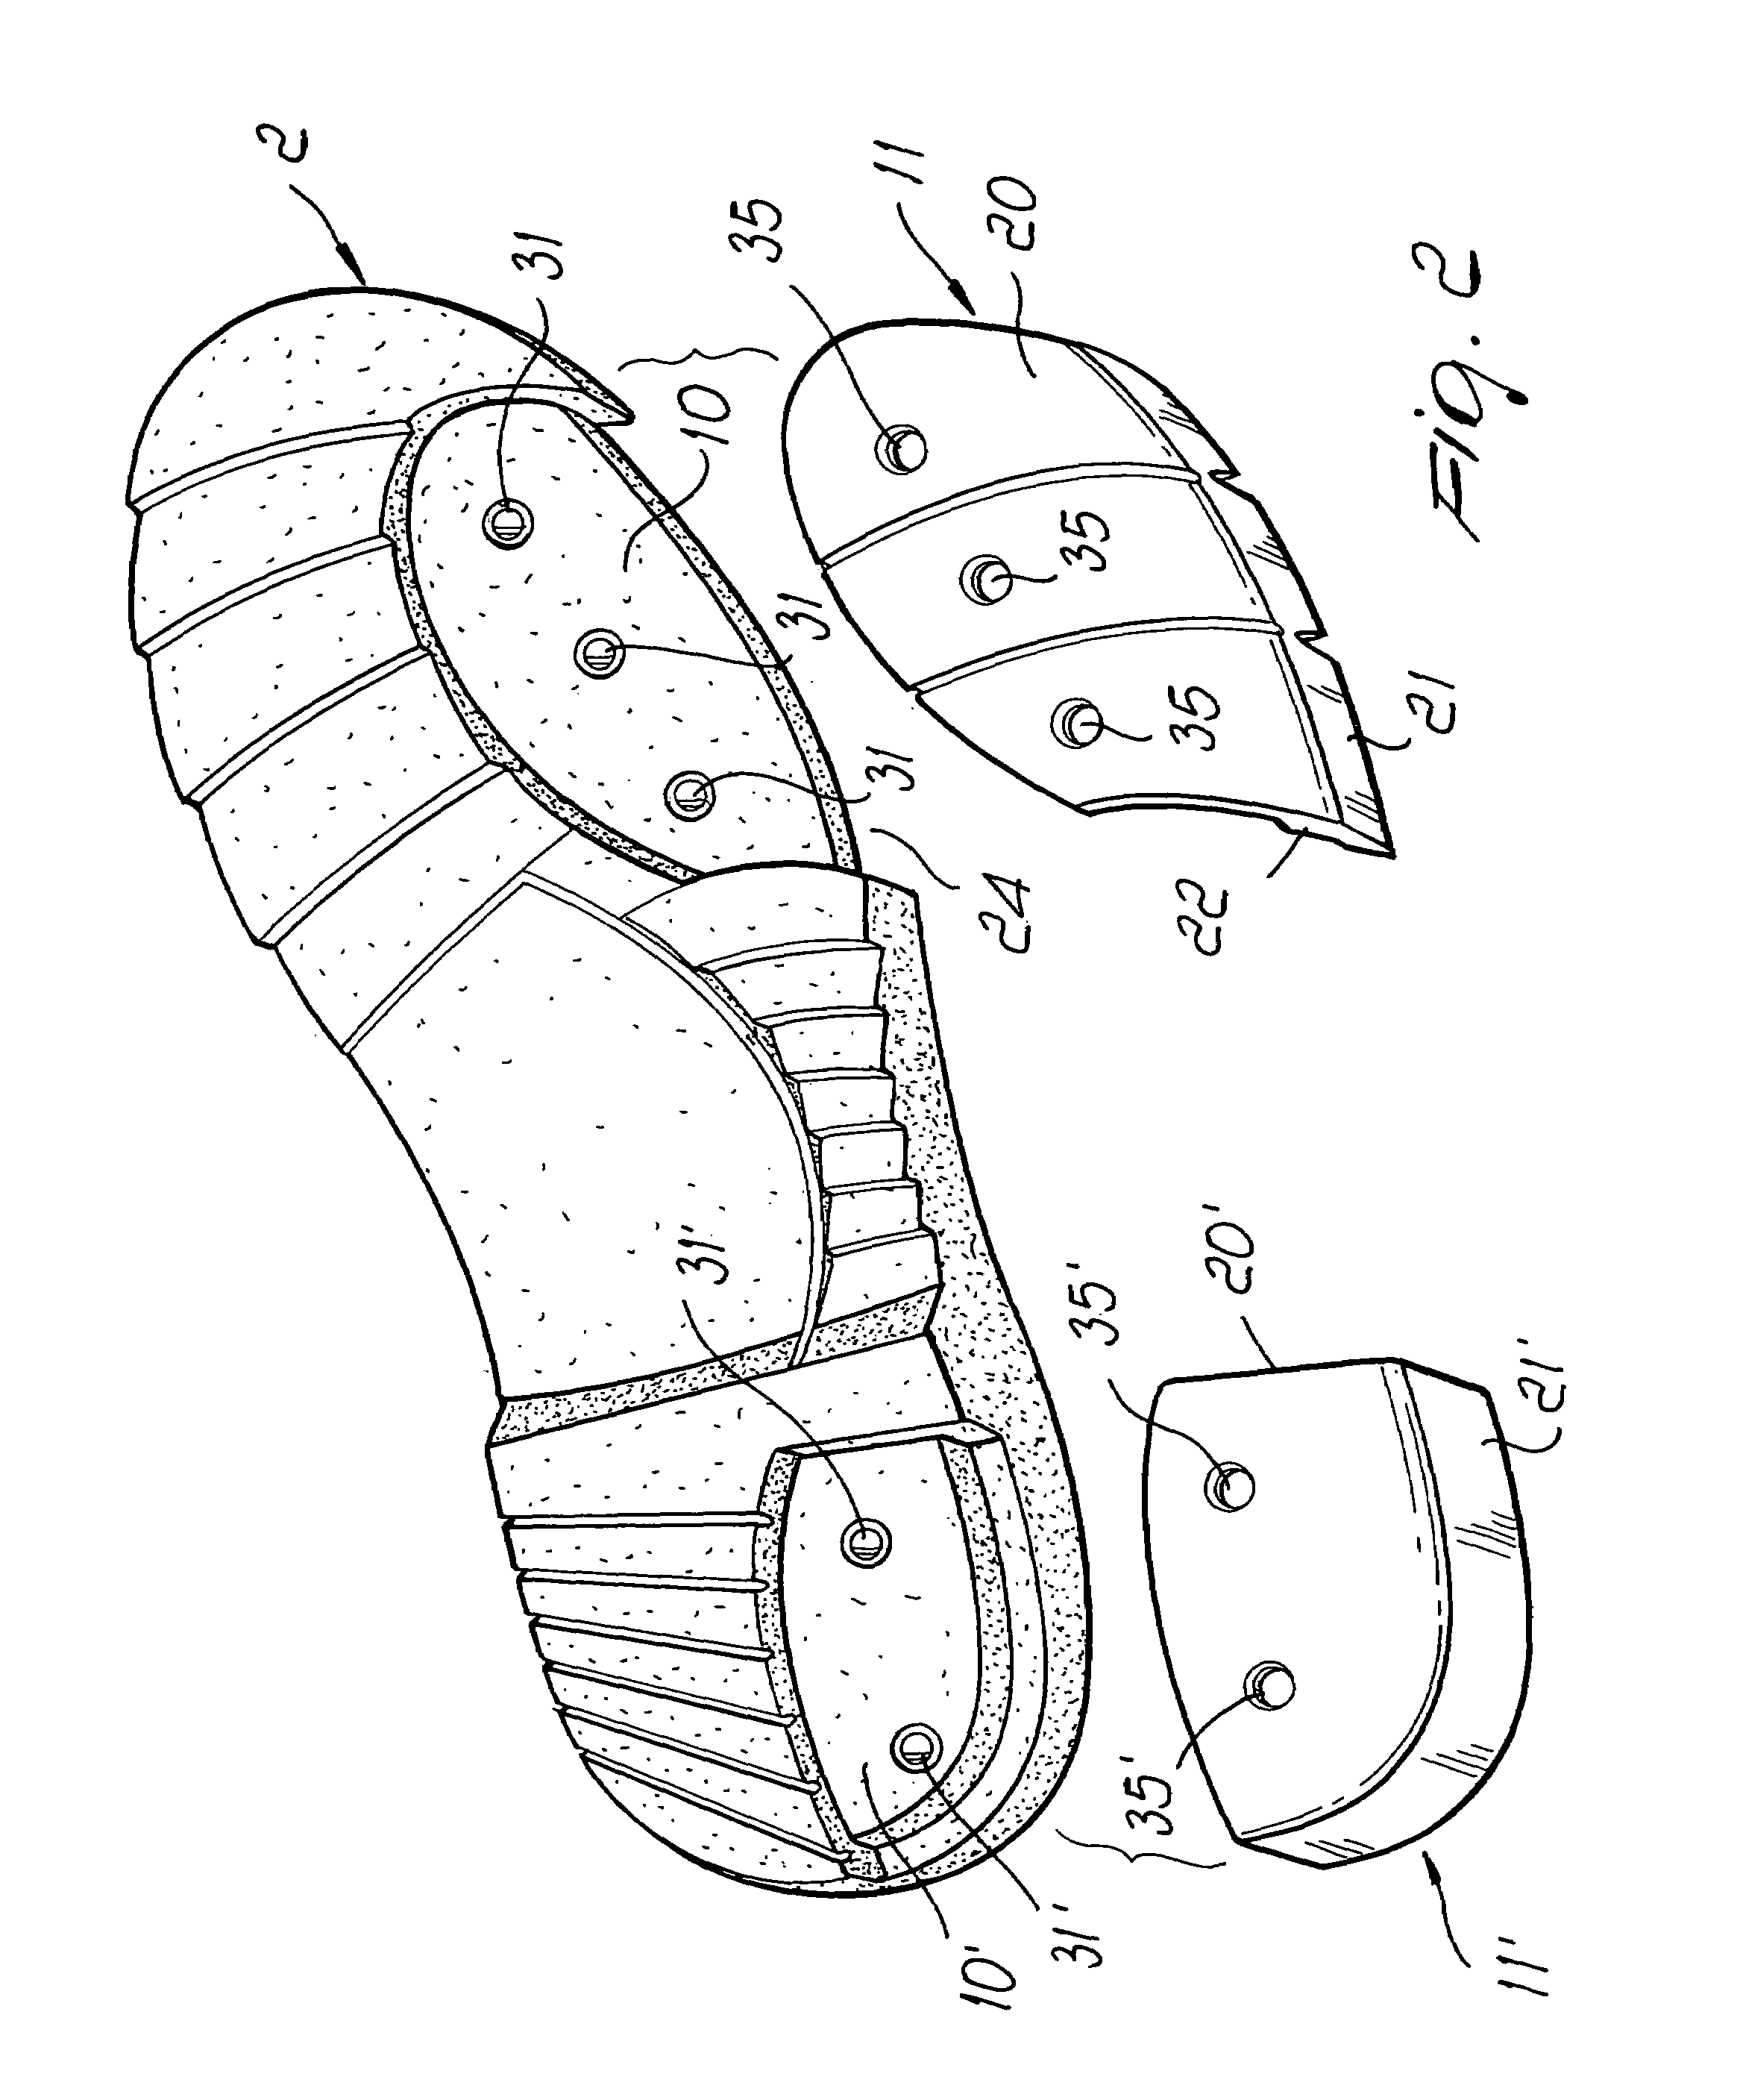 Sole for shoes particularly for practicing sports